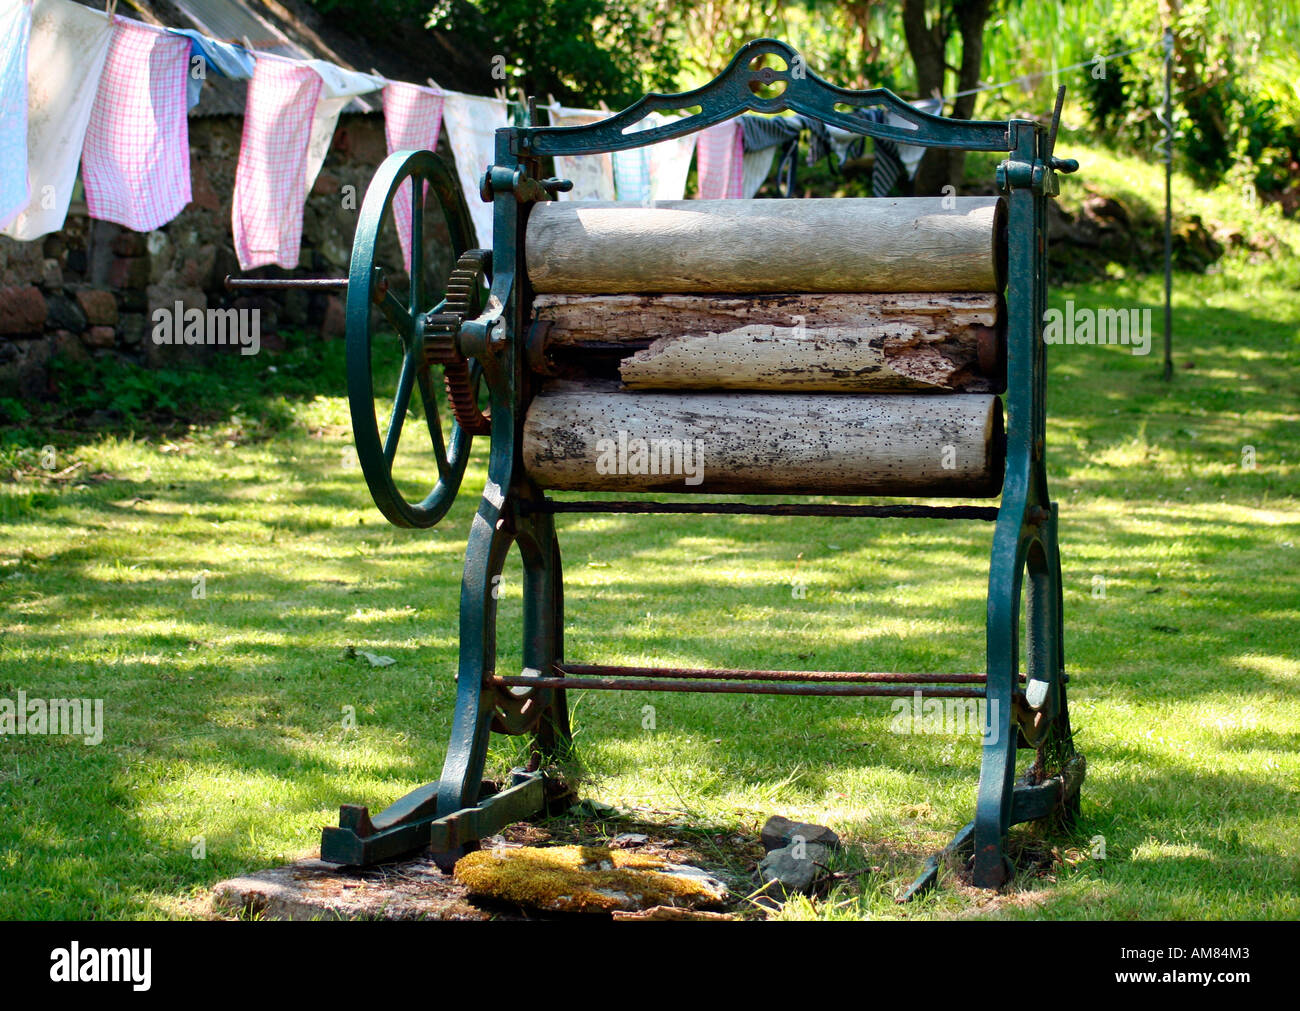 Old fashinoned wooden mangle in a garden Stock Photo